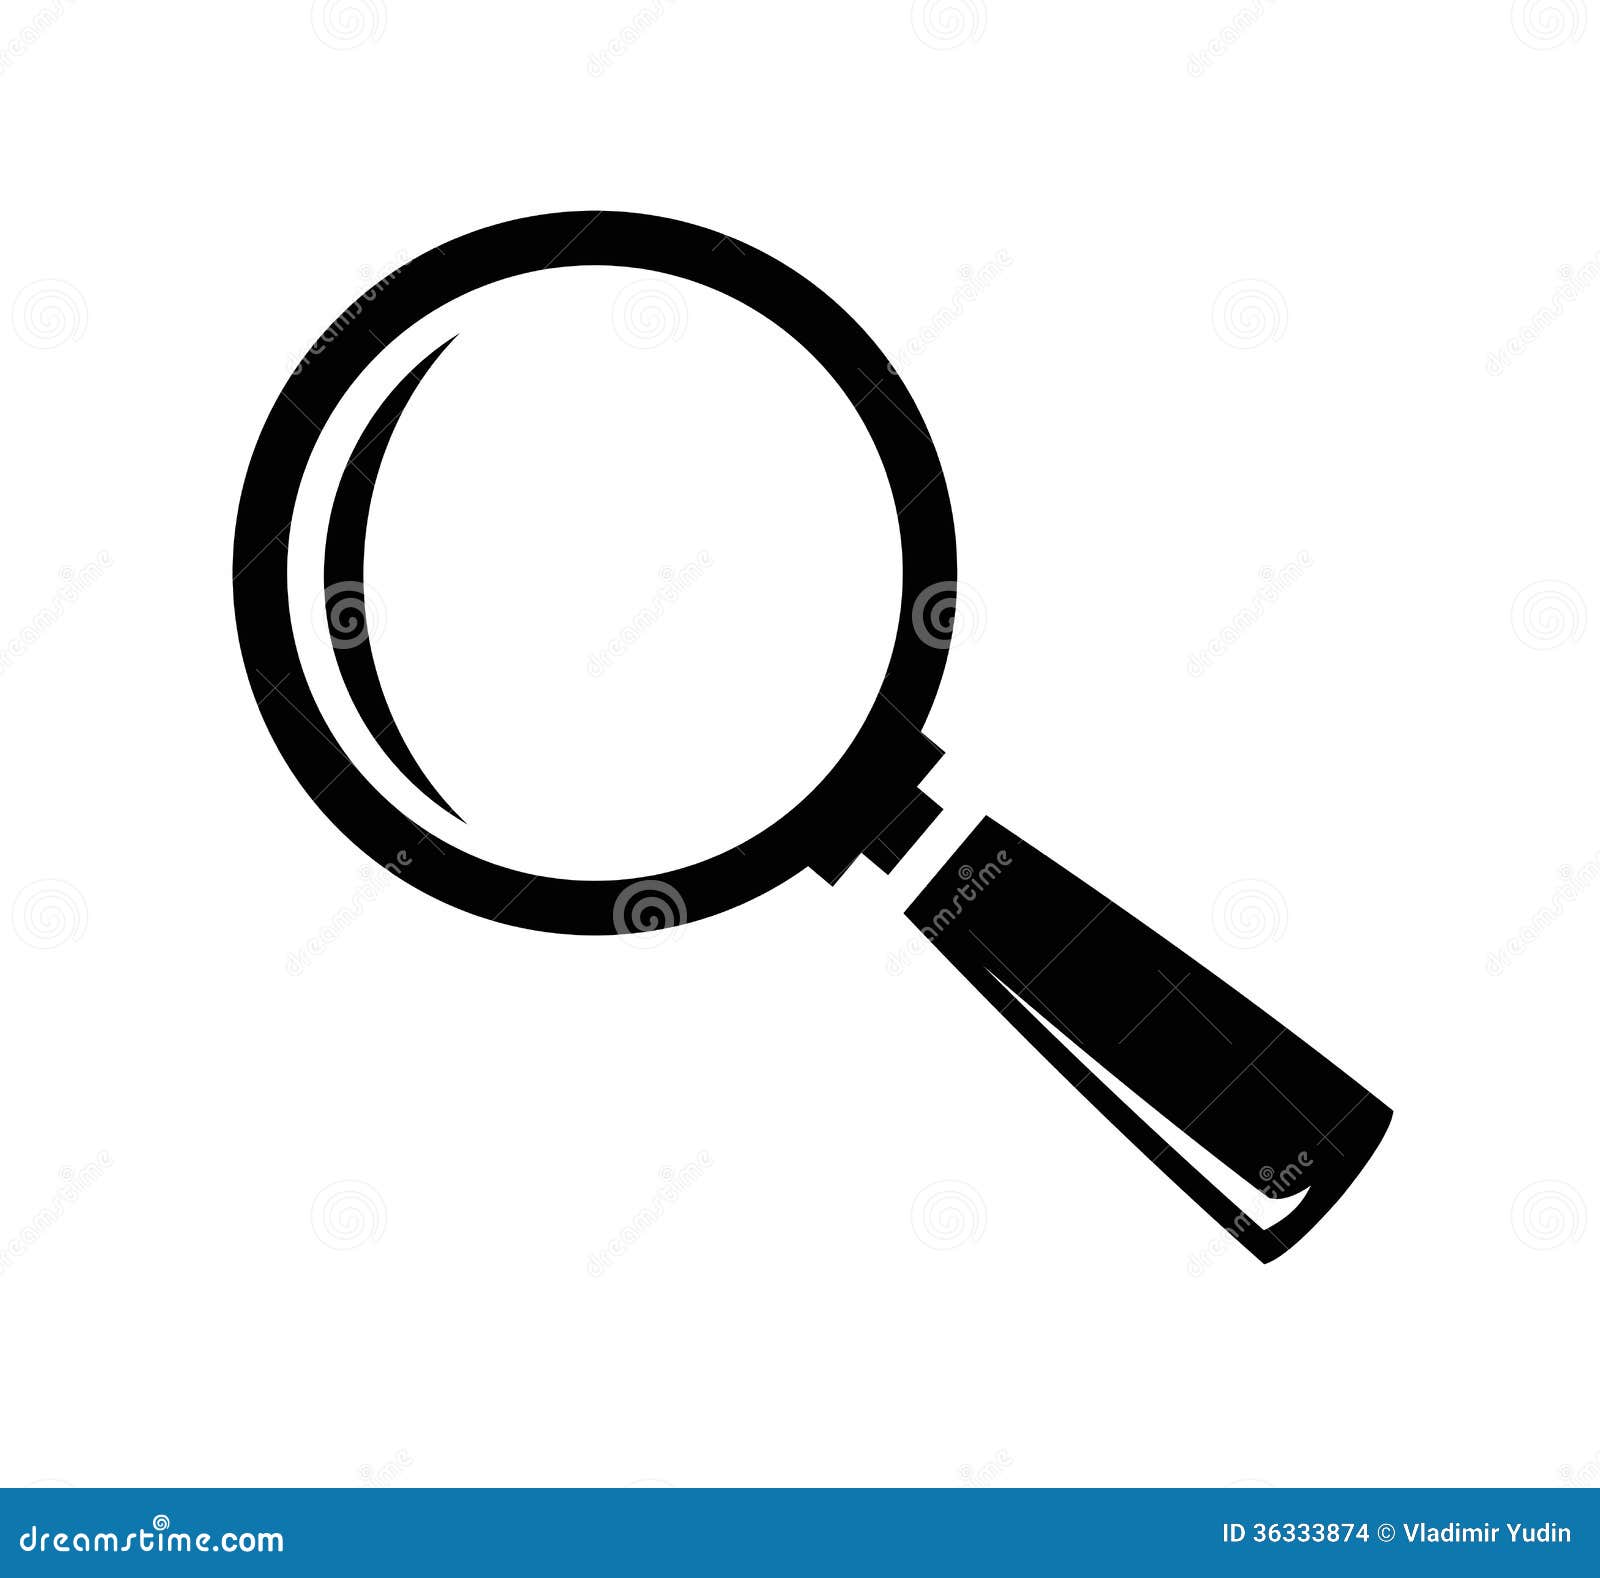  magnifying glass